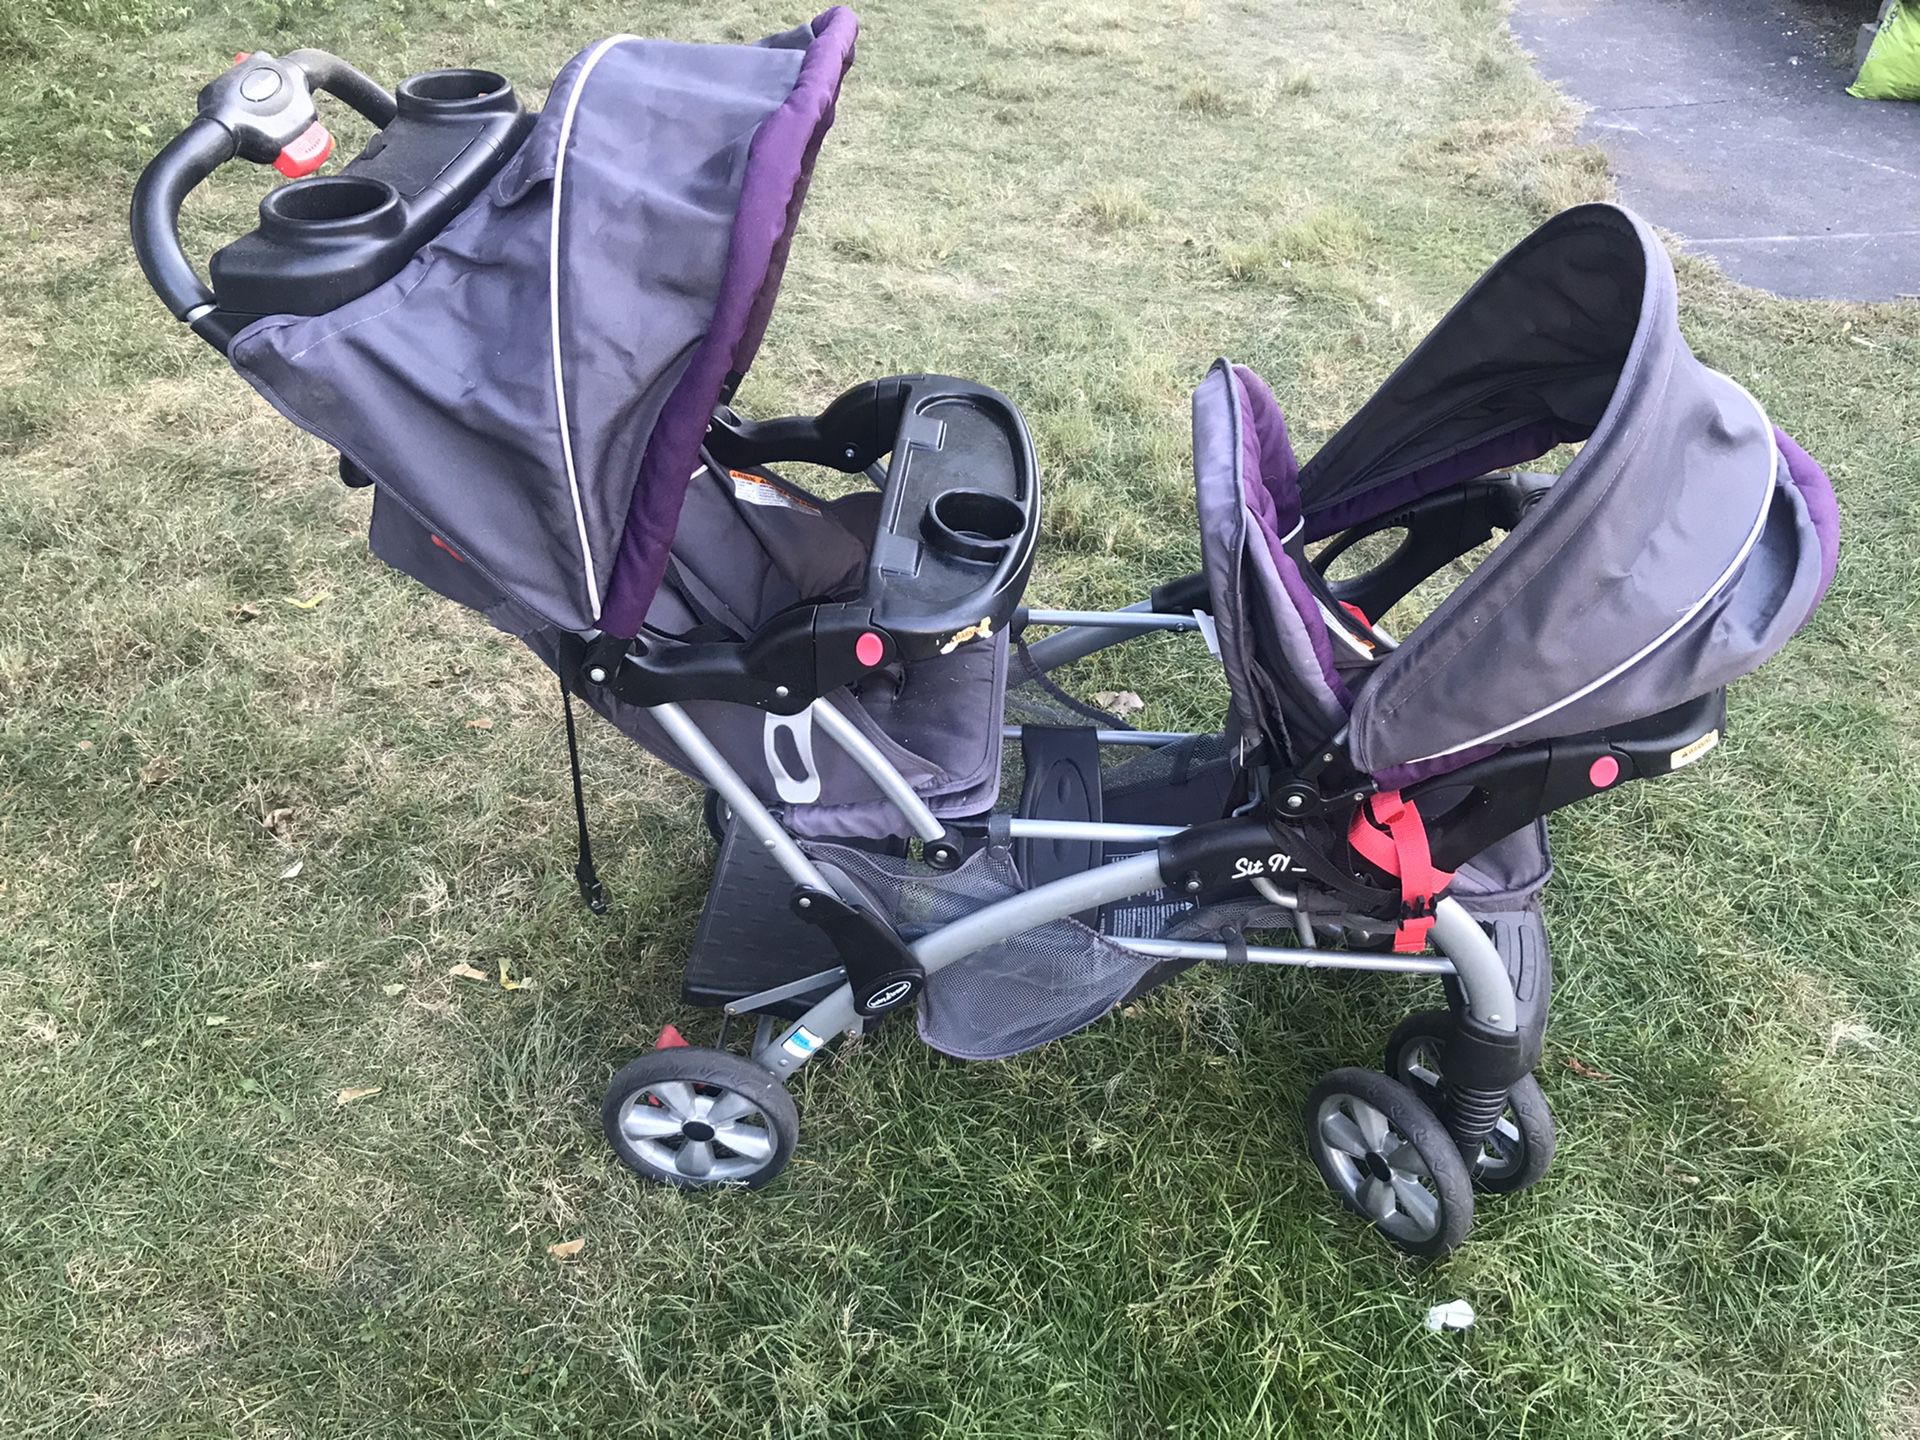 Baby Trend Sit N’ Stand Double Stroller